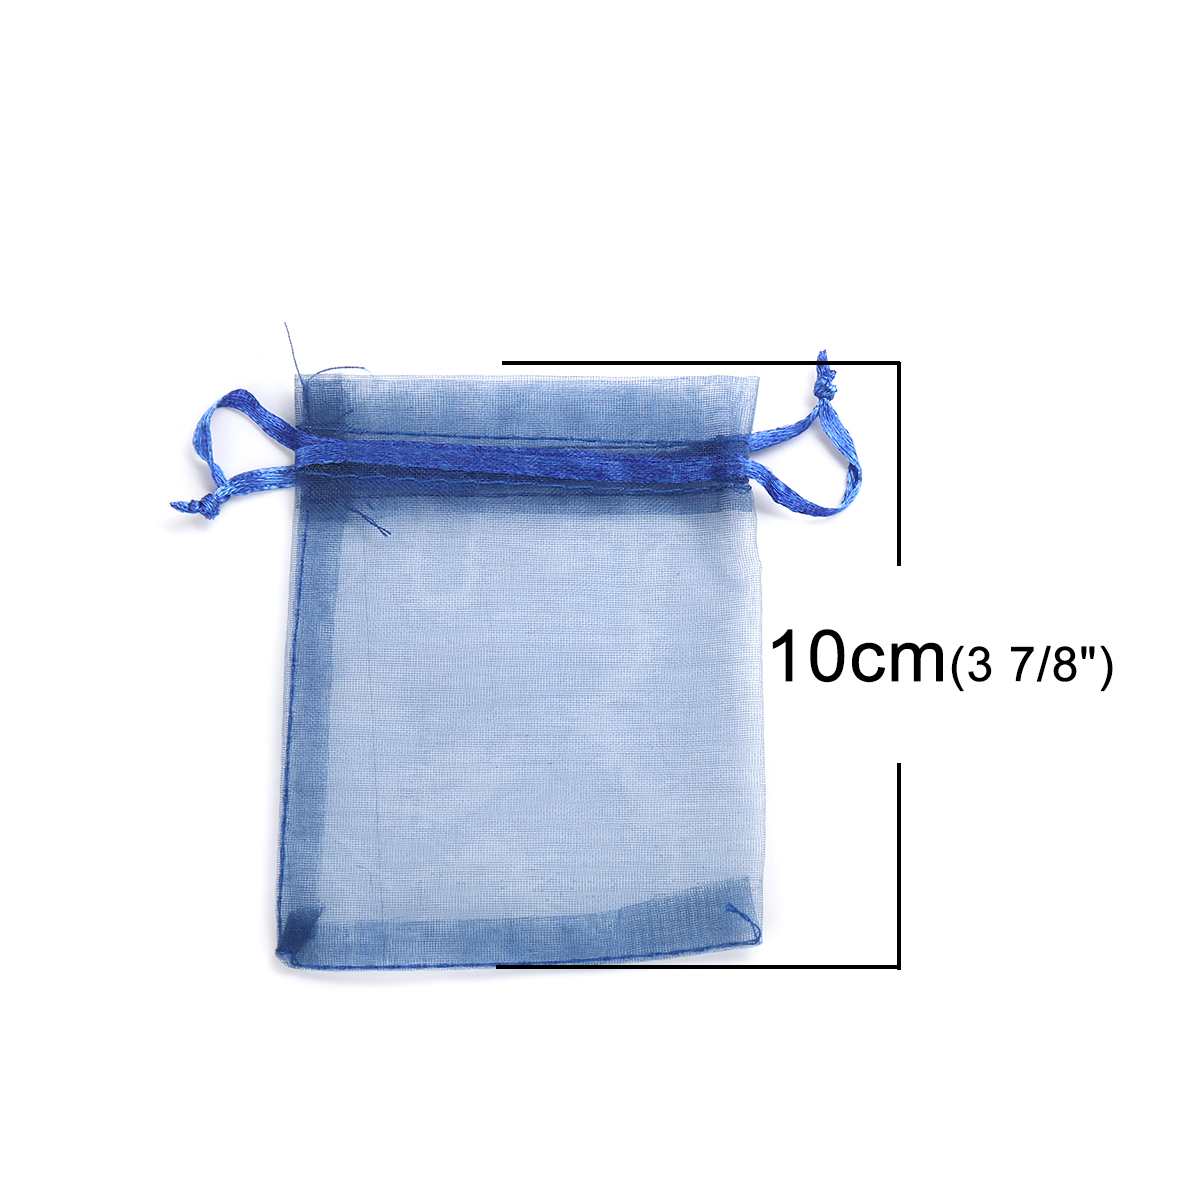 Picture of Wedding Gift Organza Jewelry Bags Drawstring Rectangle Navy Blue 10cm x8cm(3 7/8" x3 1/8"), (Usable Space: 8x8cm) 30 PCs